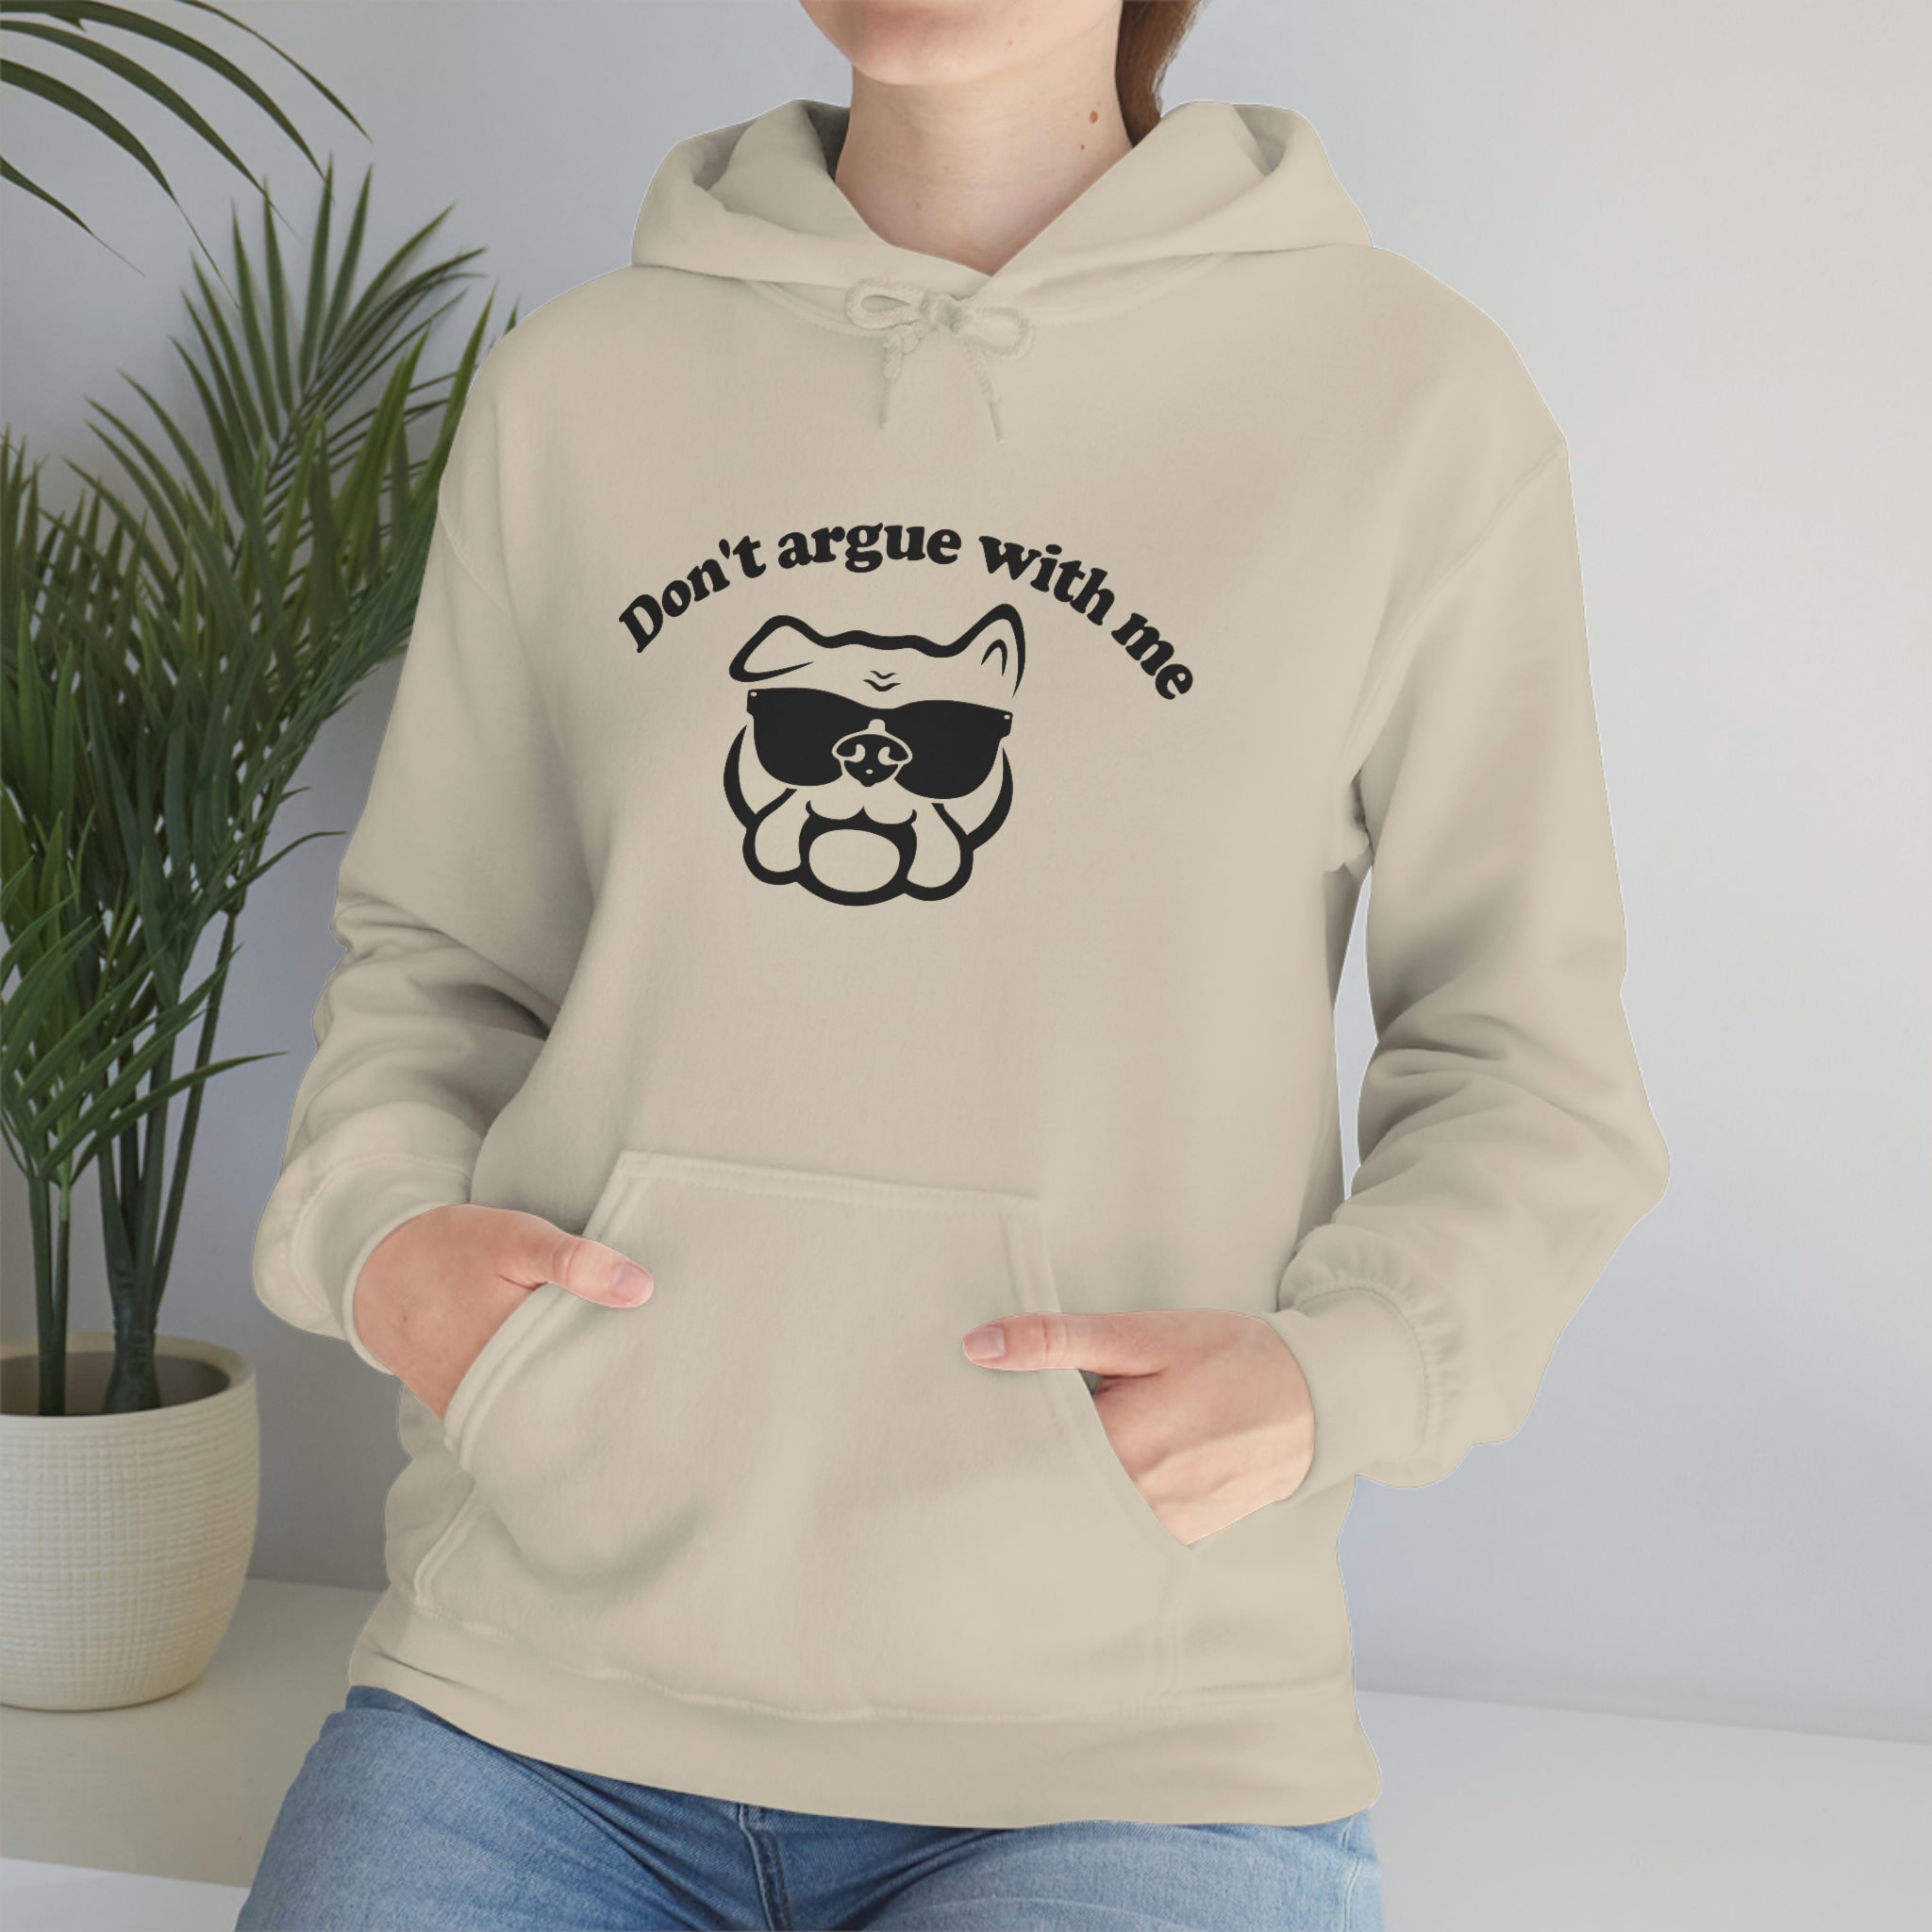 Don't Argue With Me / Black Graphic Hoodie